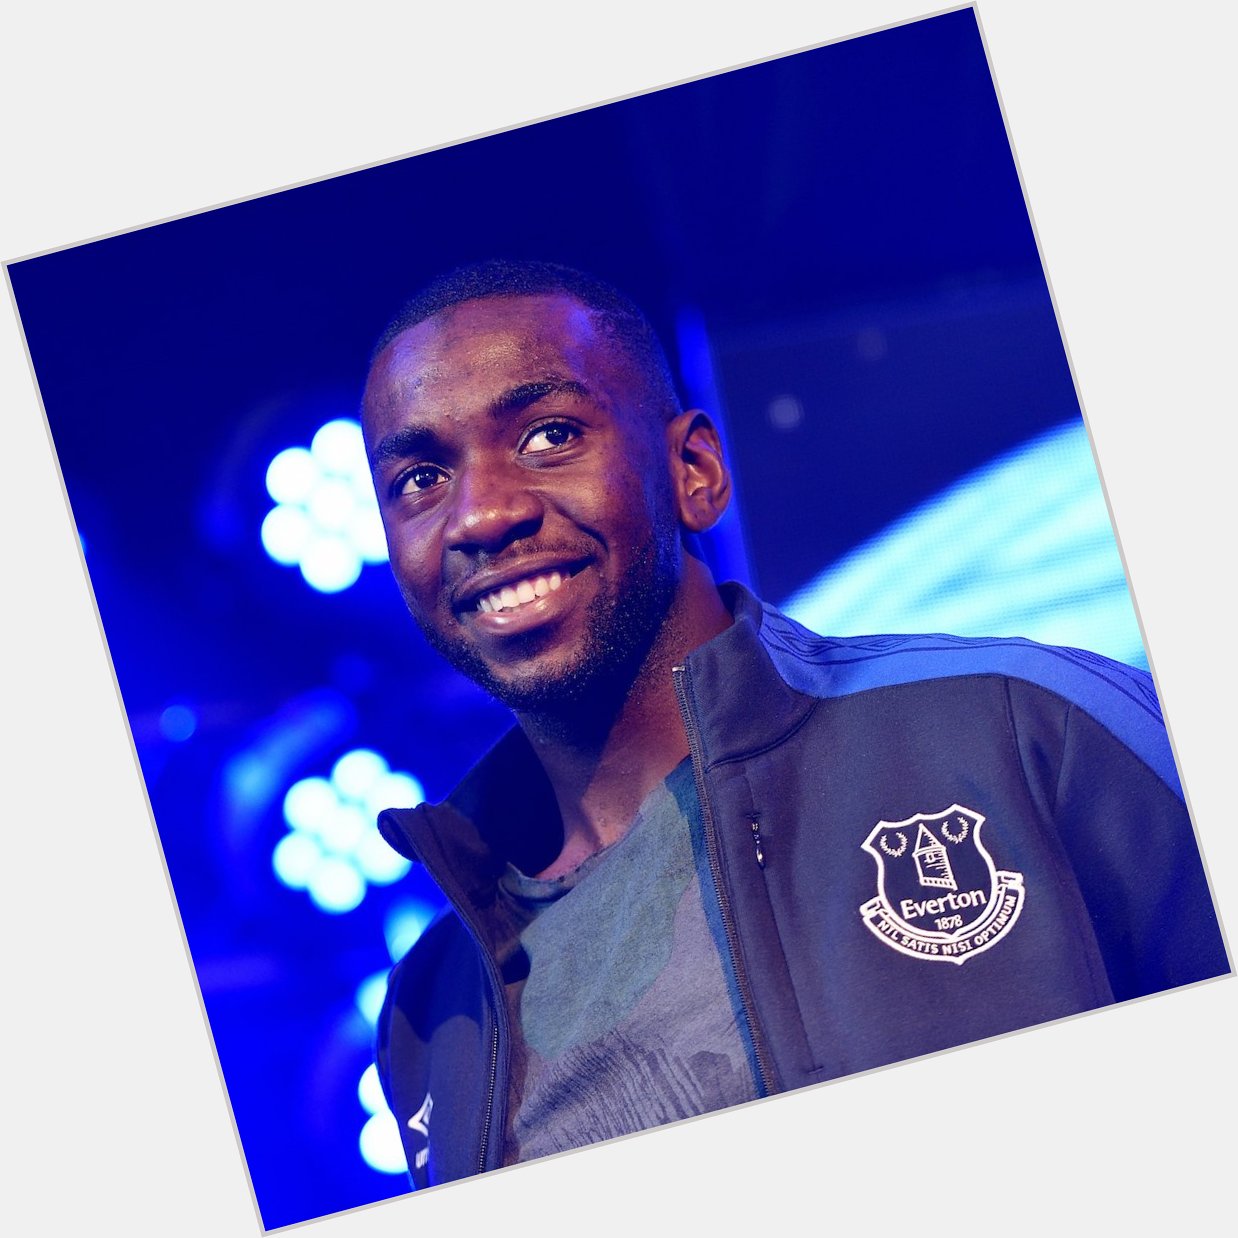  | Happy 28th birthday, Yannick Bolasie! Looking forward to having you back on the pitch next season. 